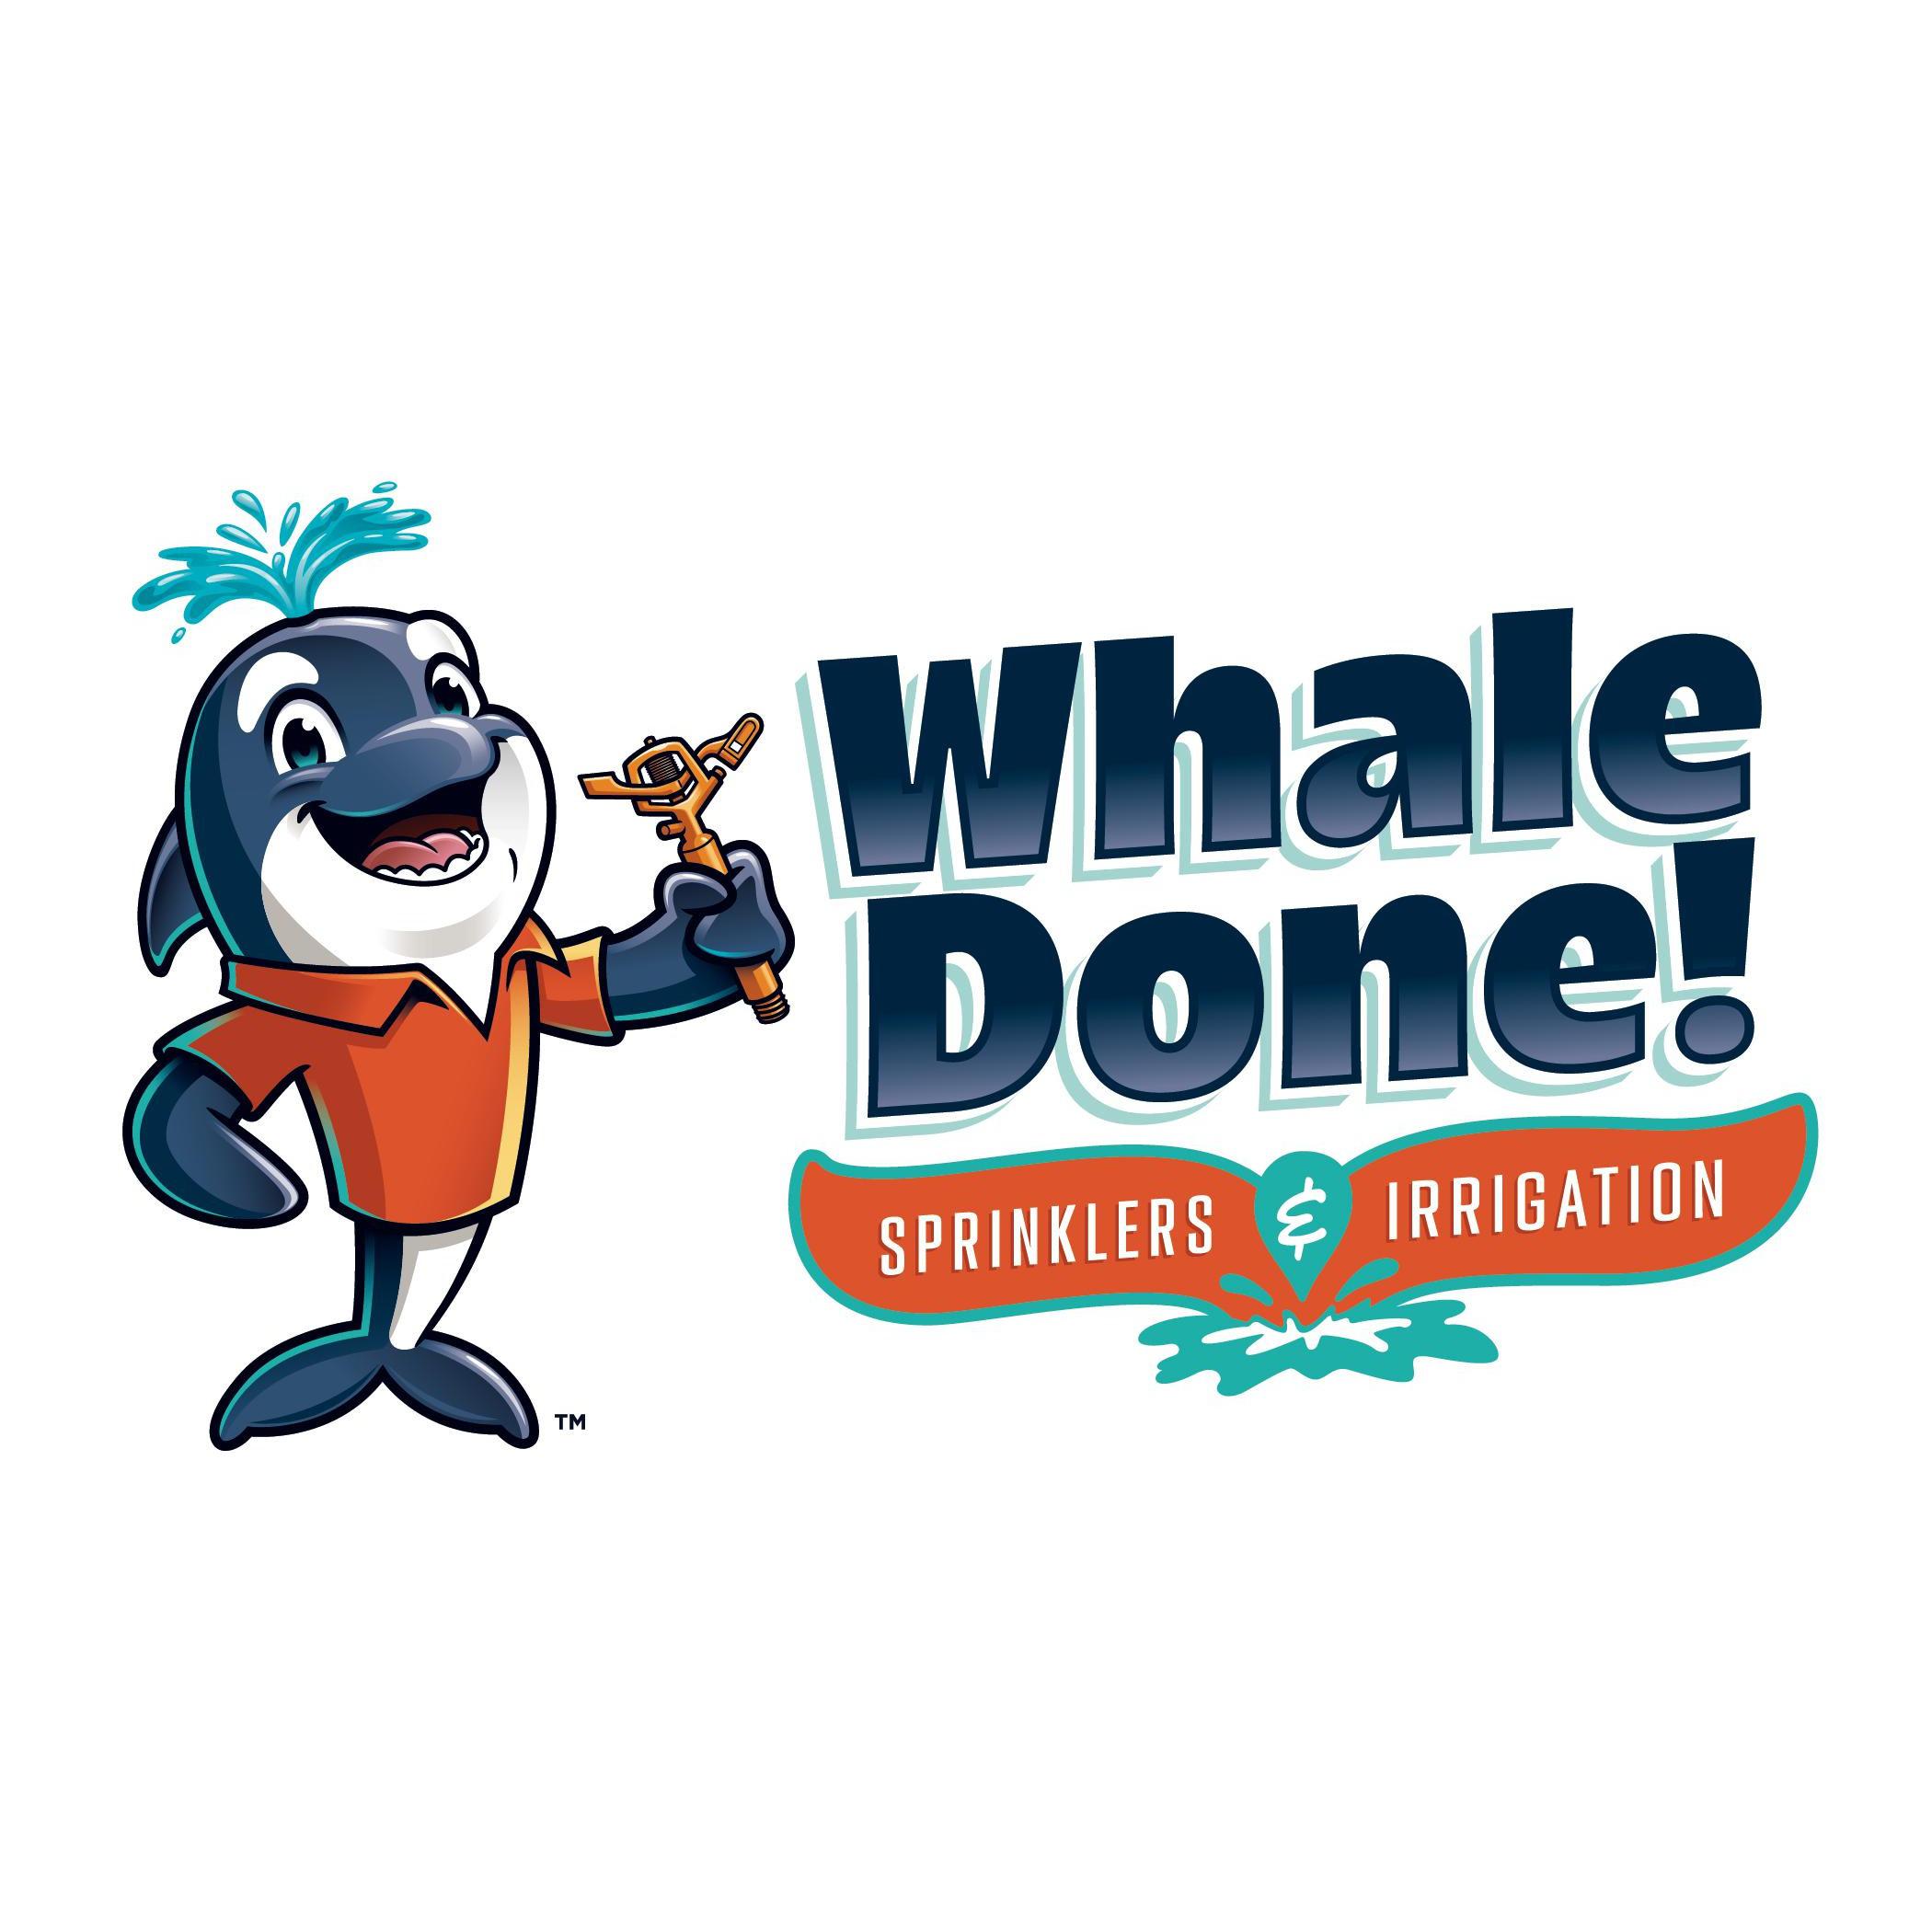 Whale Done Sprinklers & Irrigation - Irving, TX - (469)384-7767 | ShowMeLocal.com